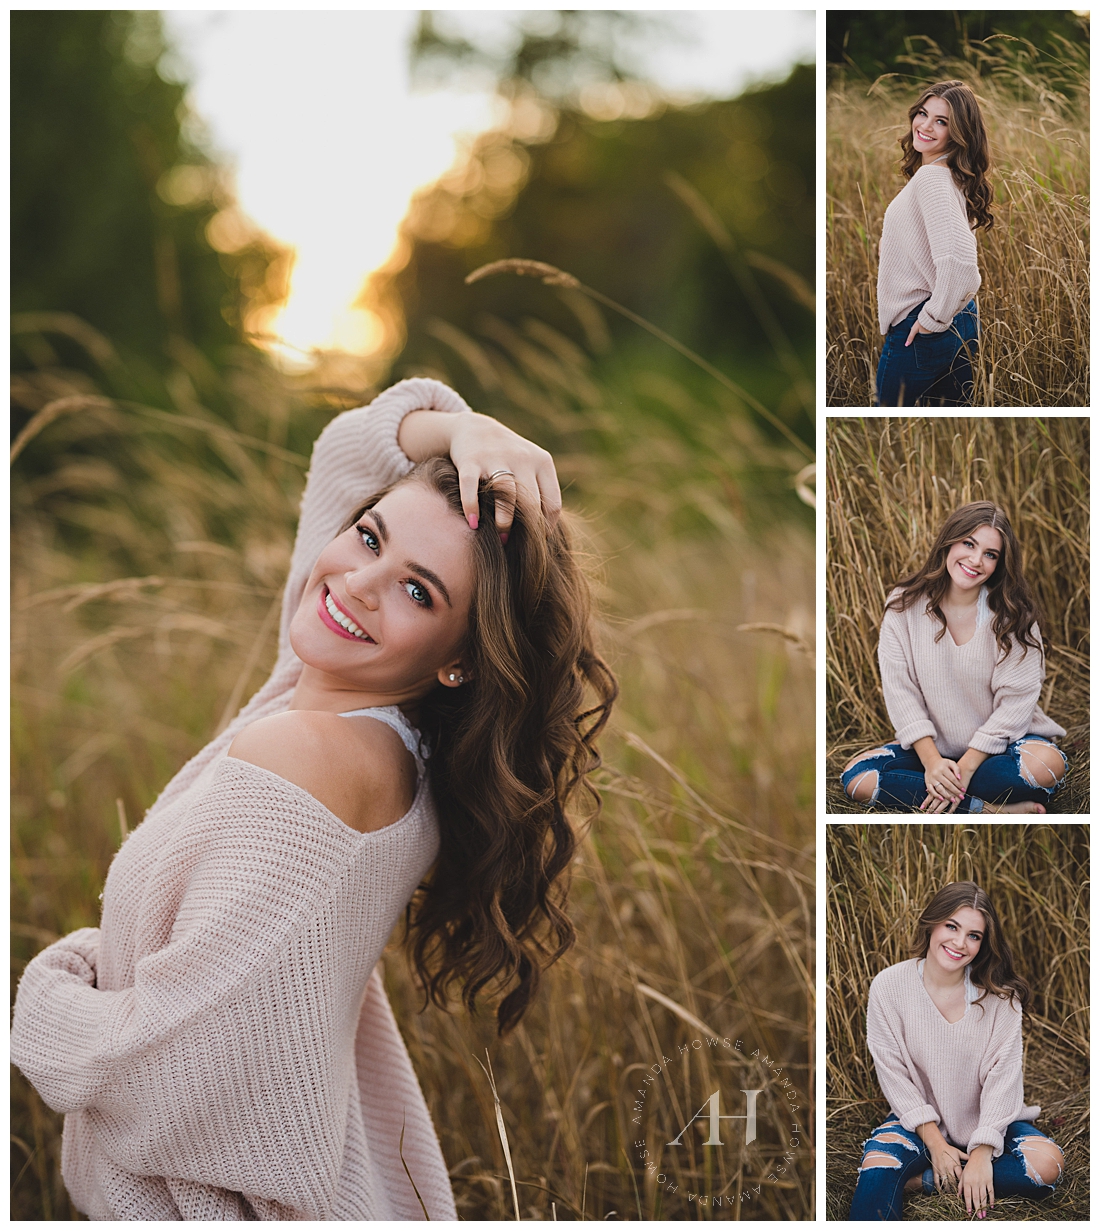 Best Washington Senior Photograph Locations For Fall and Summer | Photographed by the Best Tacoma, Washington Senior Photographer Amanda Howse Photography